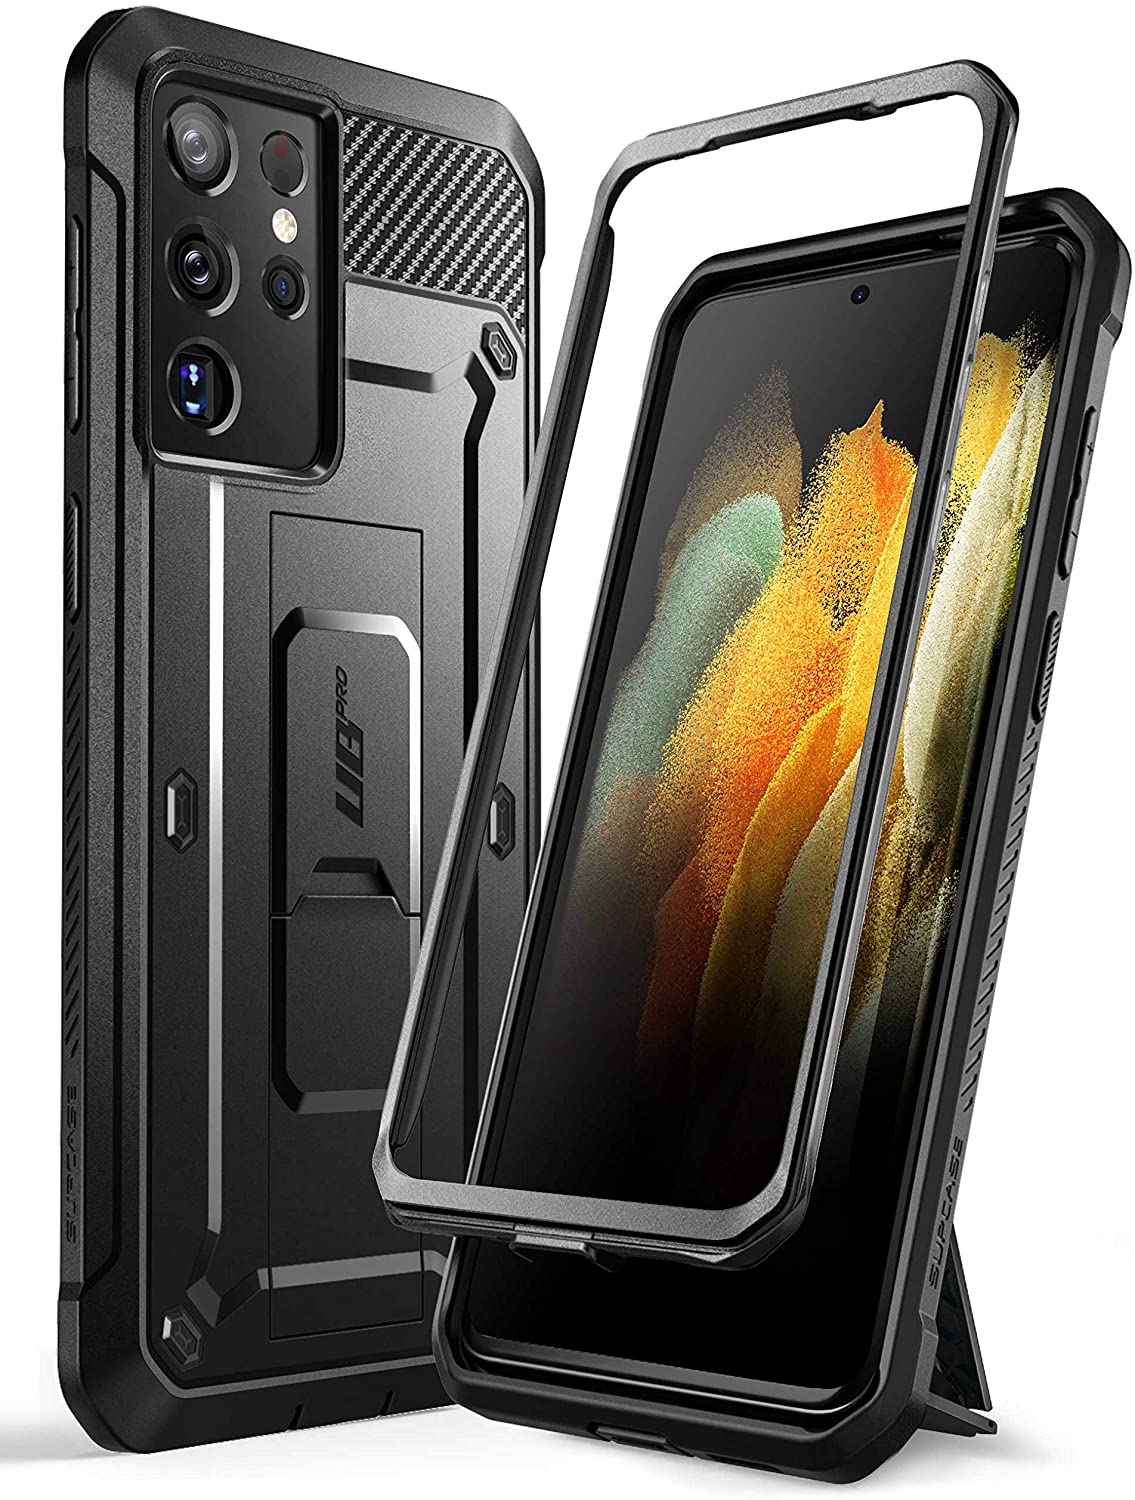 SUPCASE Unicorn Beetle Pro Galaxy S21 / Plus / Ultra Full-Body Dual Layer Rugged Holster & Kickstand Case Without Built-in Screen Protector (Black)